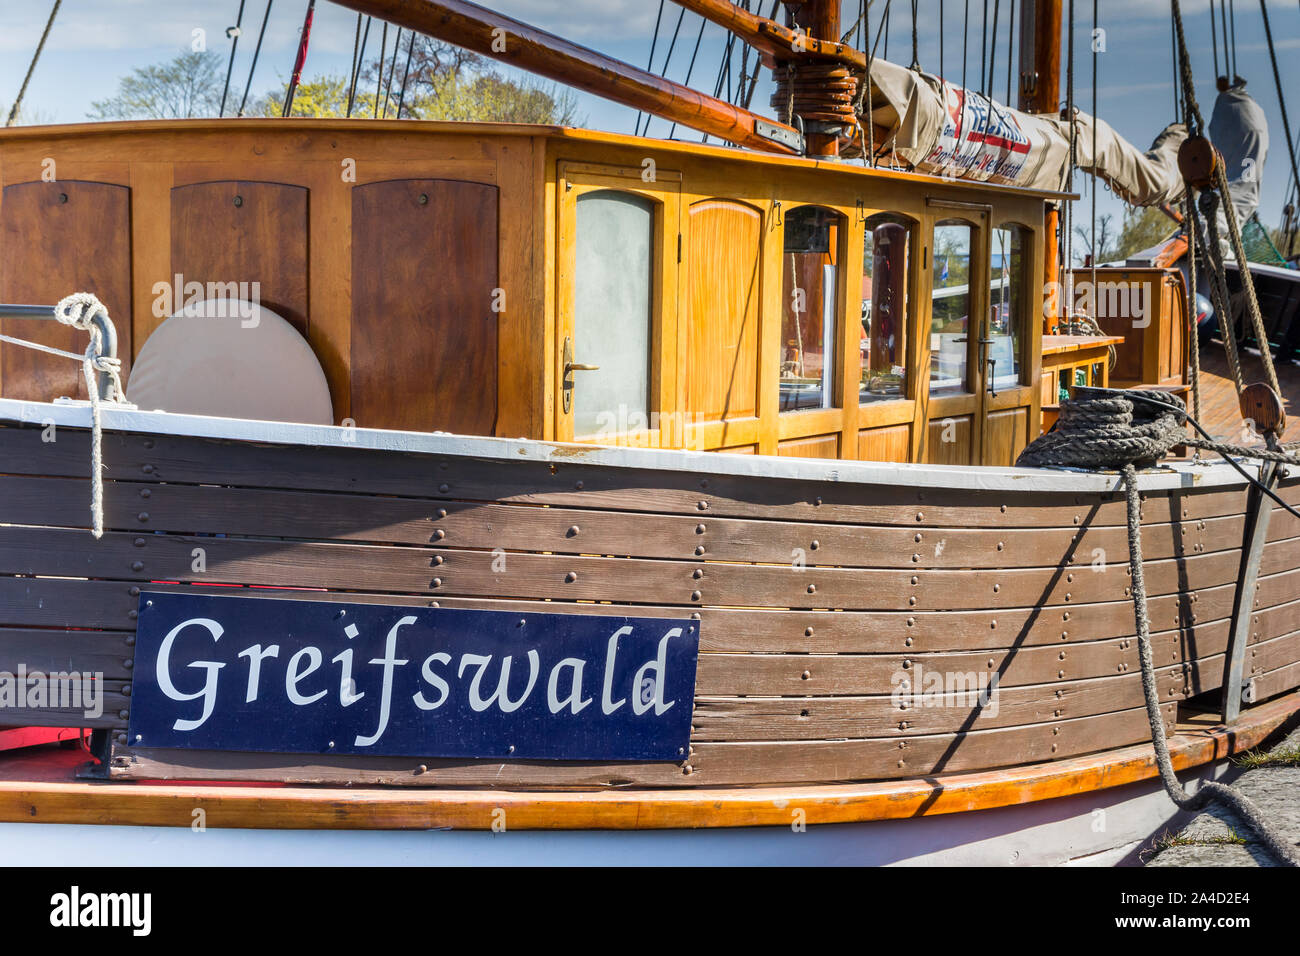 City name on a wooden ship in the harbor of Greifswald, Germany Stock Photo